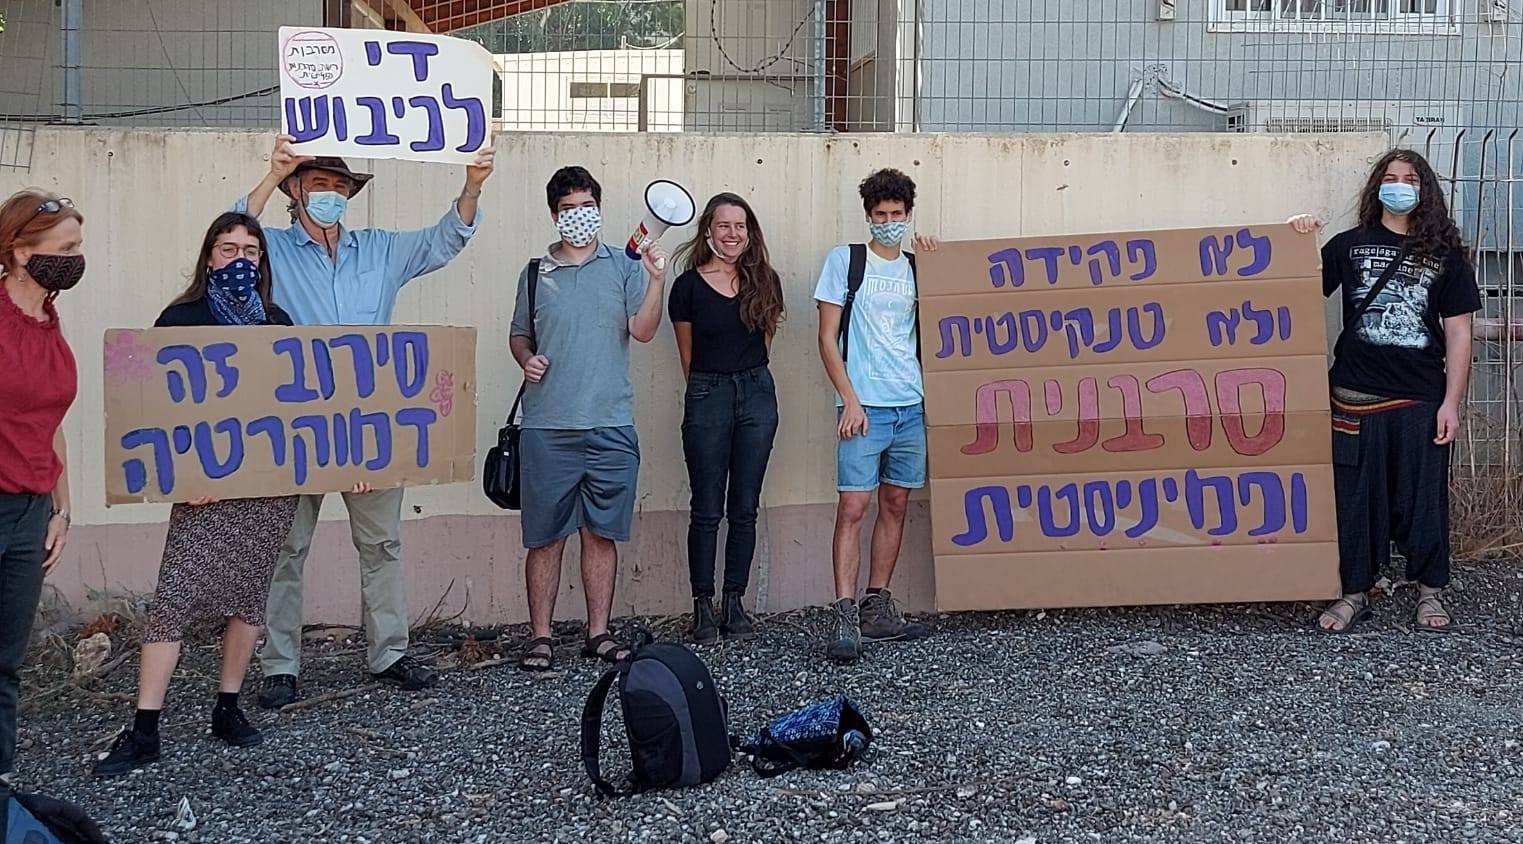 Demonstrators express solidarity with Hallel Rabin (center, wearing black) outside the Tel Hashomer military induction center near Tel Aviv, October 21, 2020. The large placard at the right reads: "Not as a clerk and not in a tank – Rather a refuser and feminist"; at the left the sign held aloft reads "End the occupation"; and the placard below it reads: "Refusal is democracy."